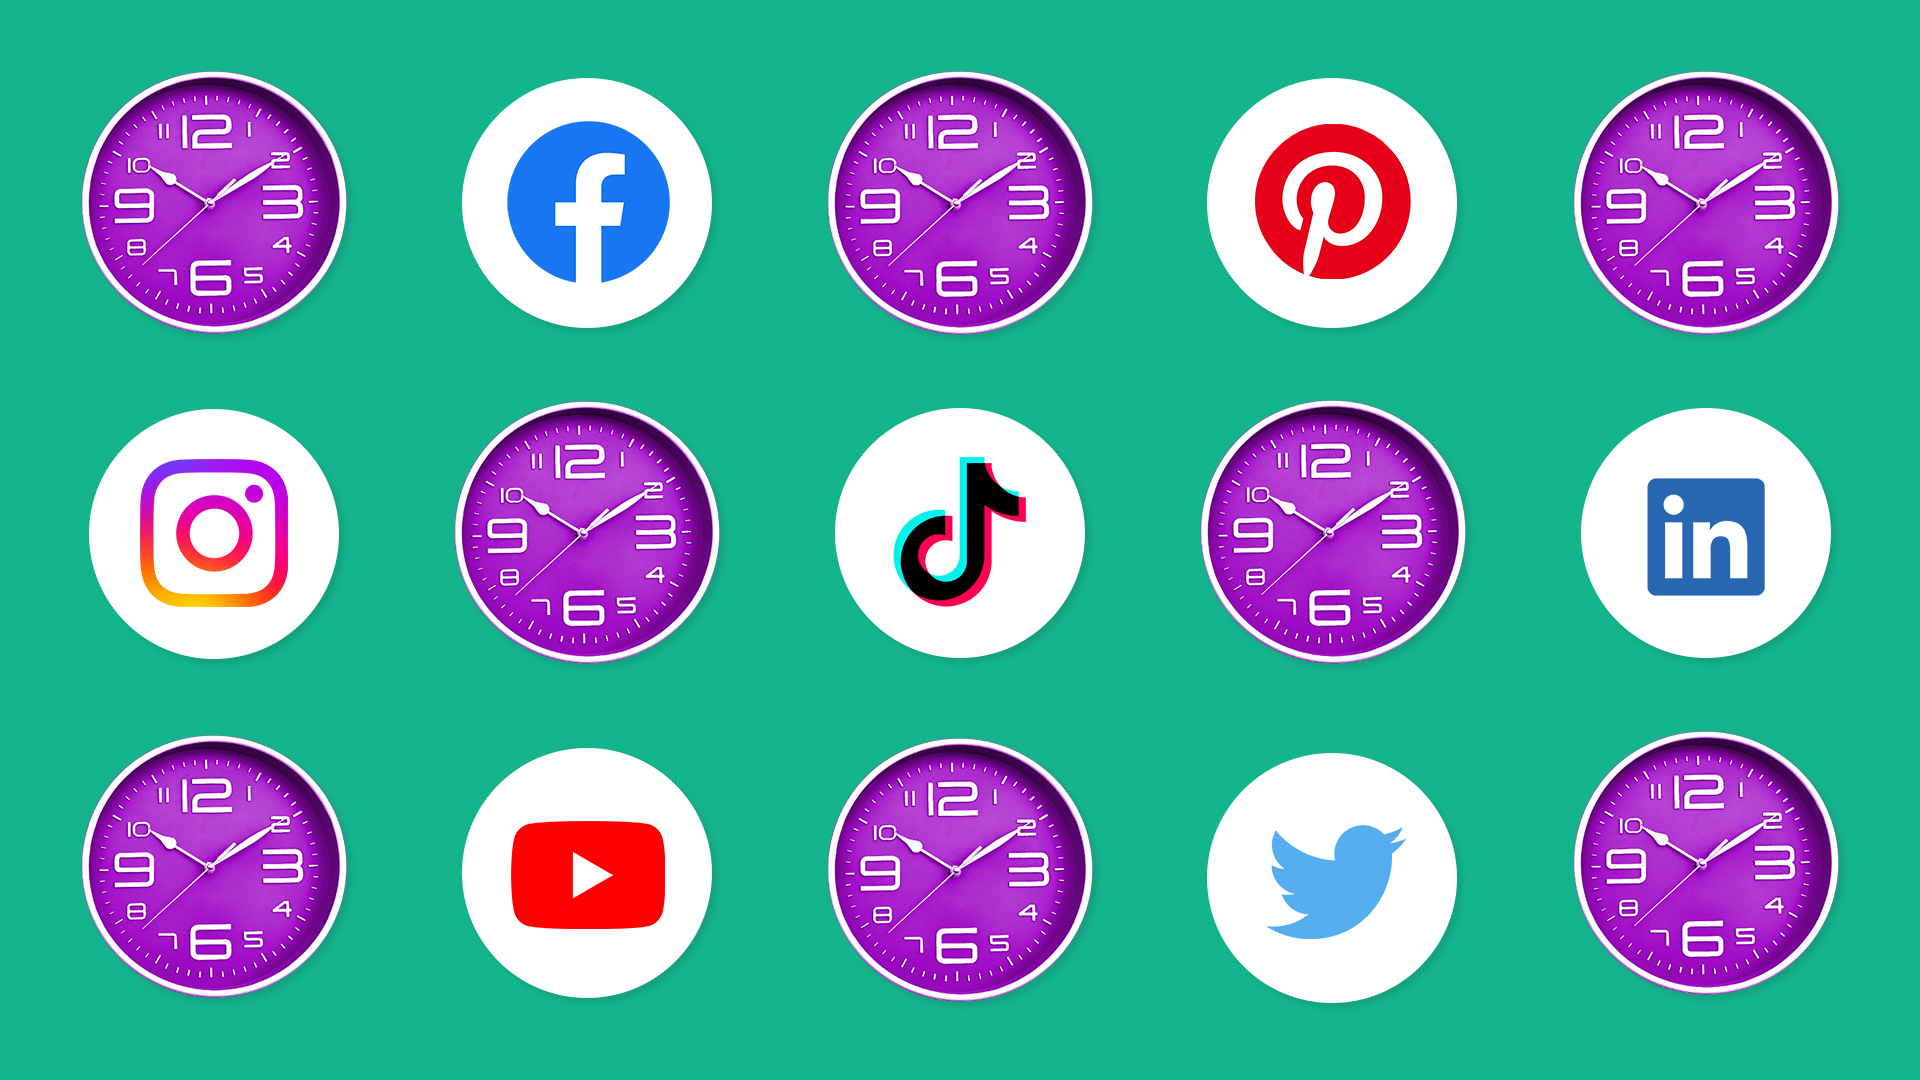 This image features a green background with 15 circles on it. In every other square there is a clock. In the others, there is a different social media logo. This image represents the best time to post on social media.